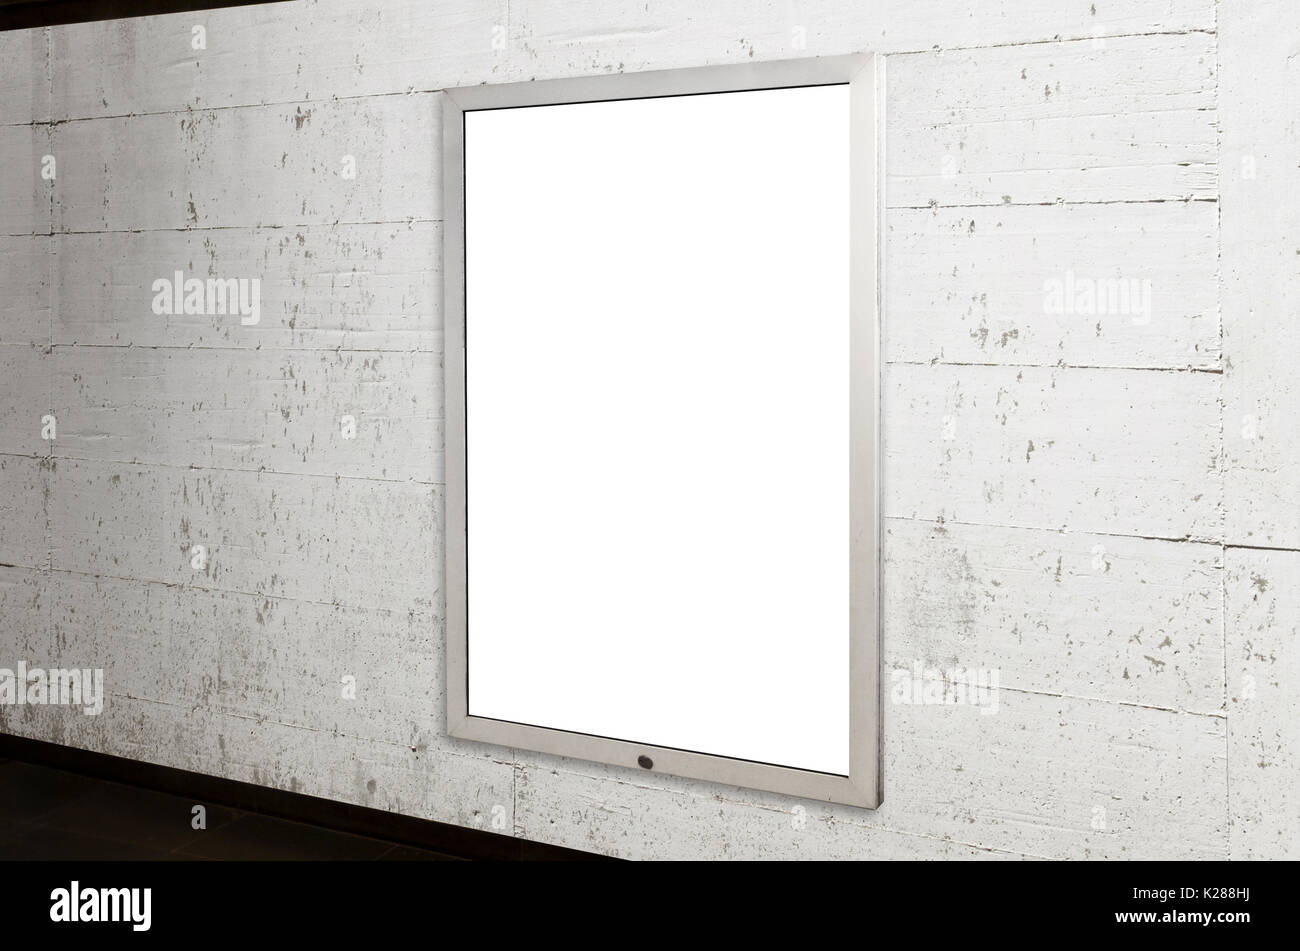 Underground billboard mockup. Isolated poster for advertising campaign promotion Stock Photo